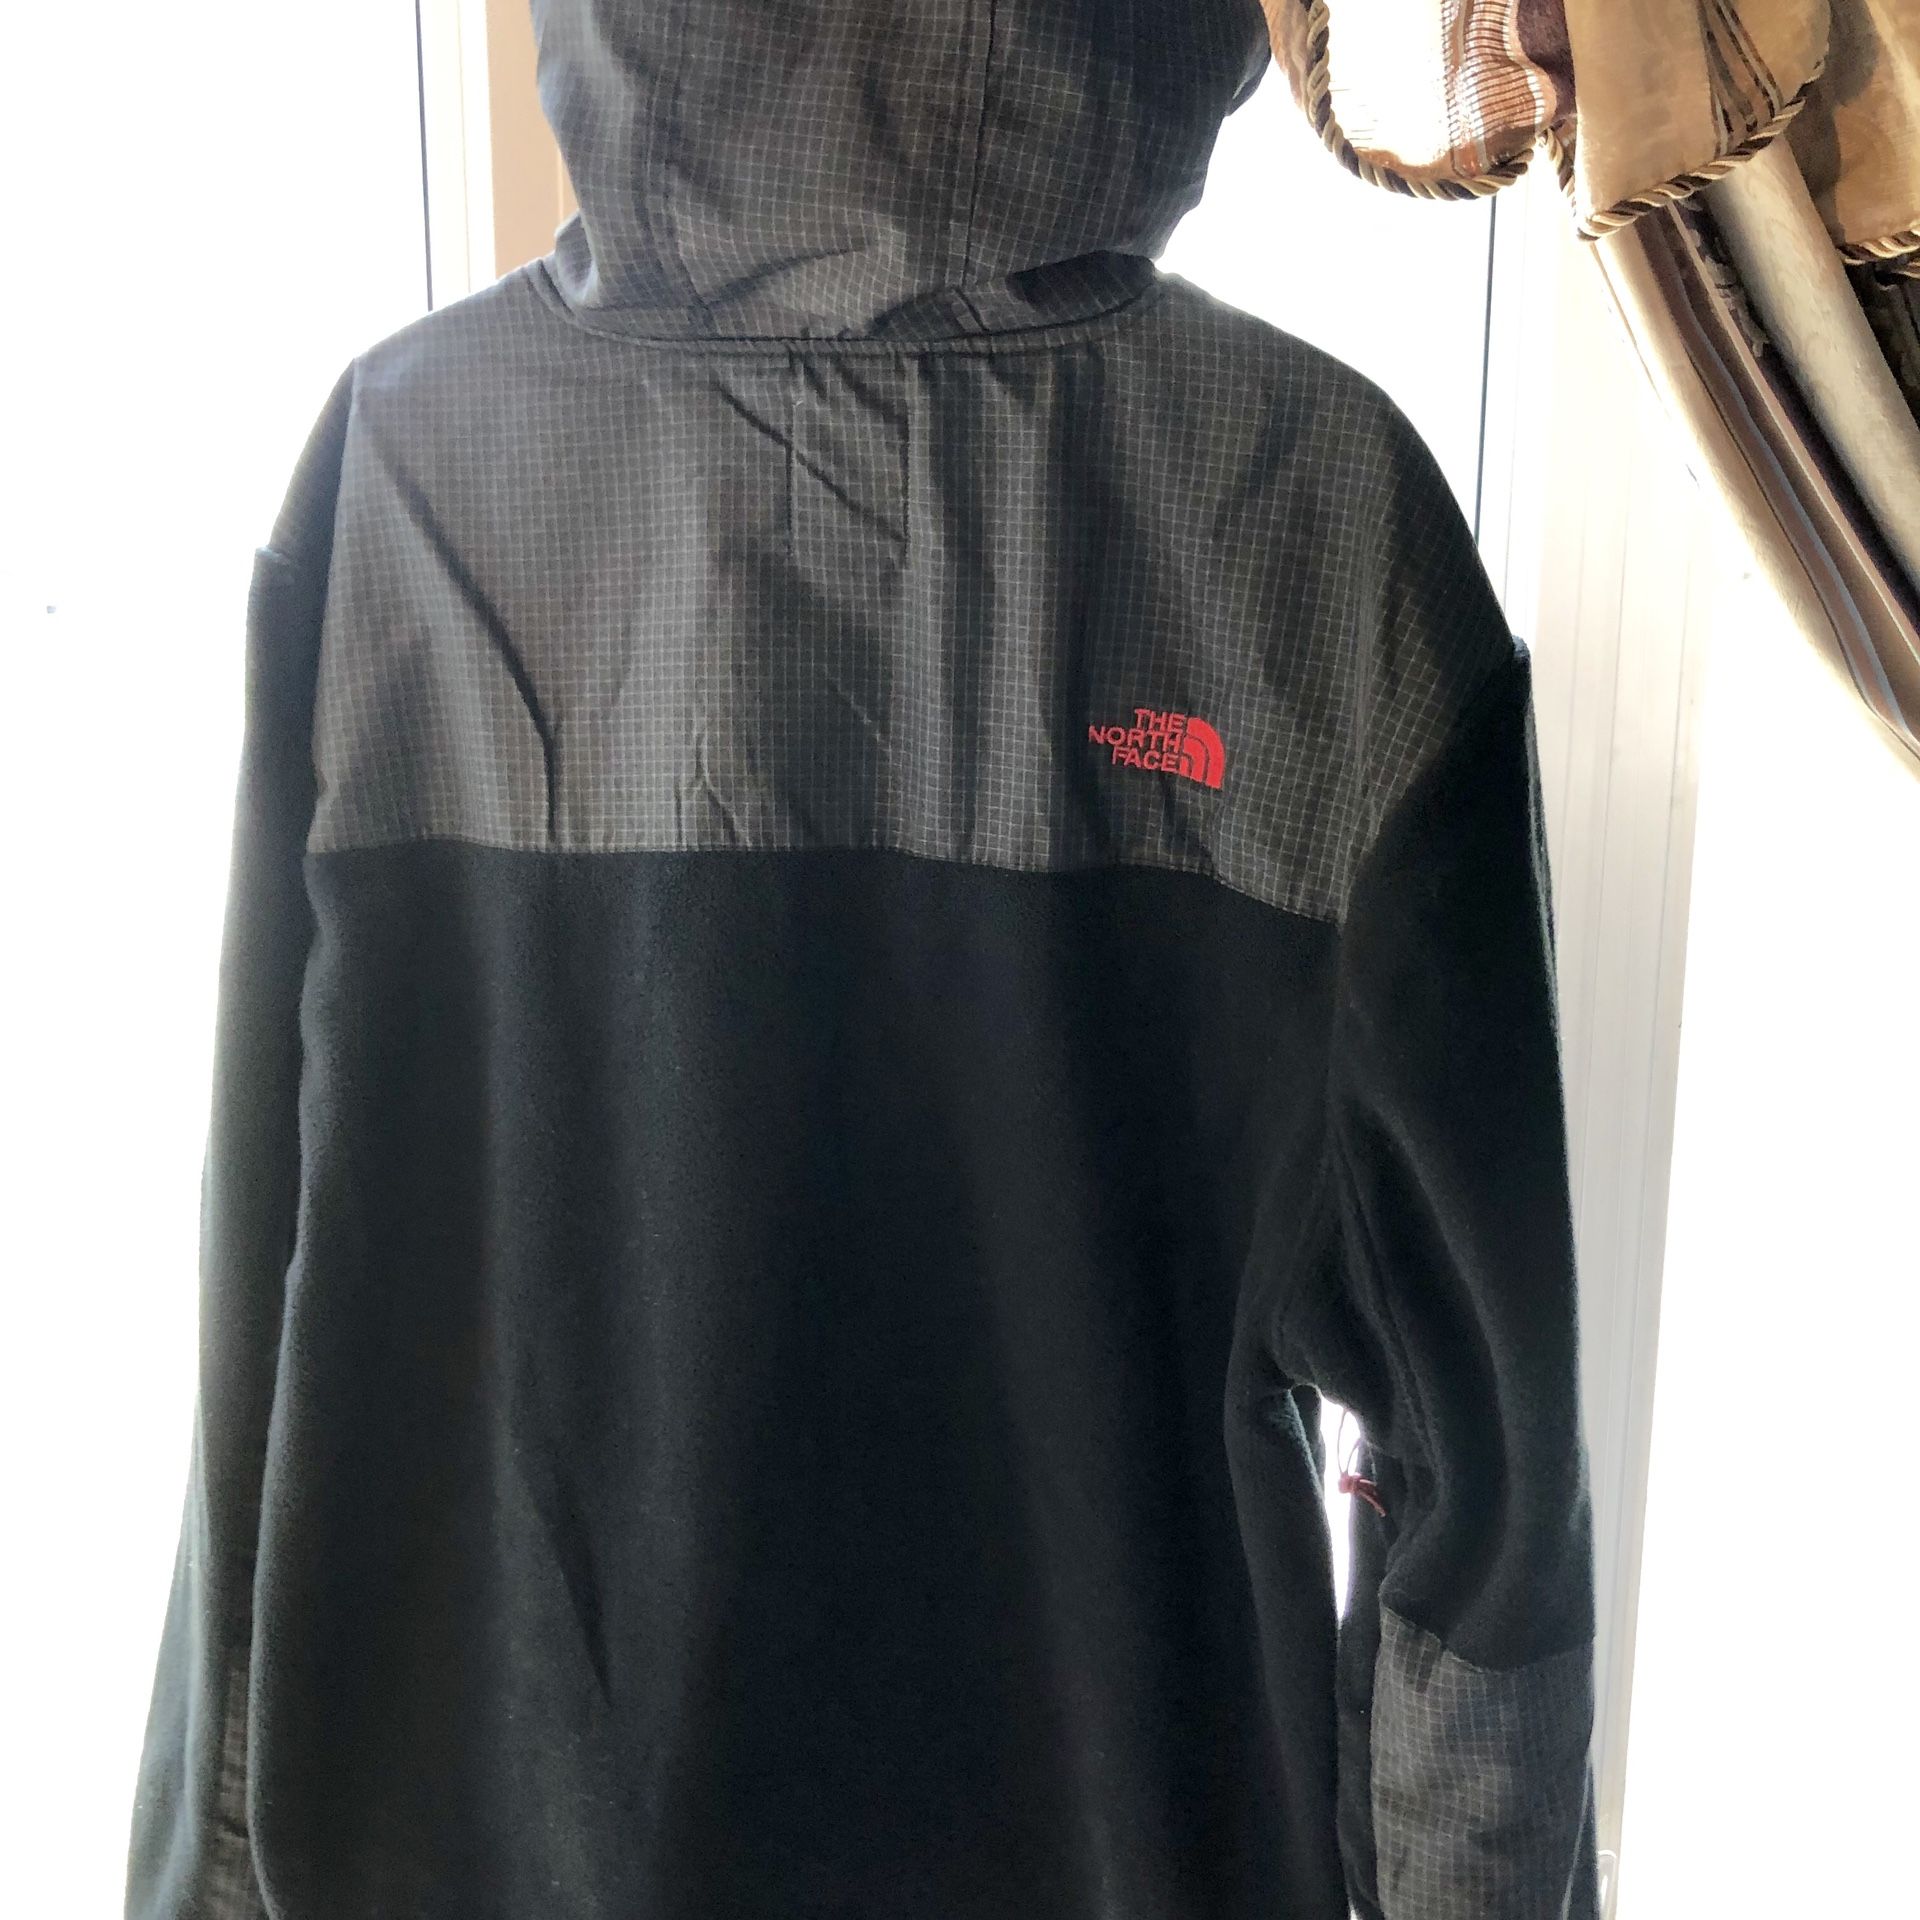 North face fleece with hoodie